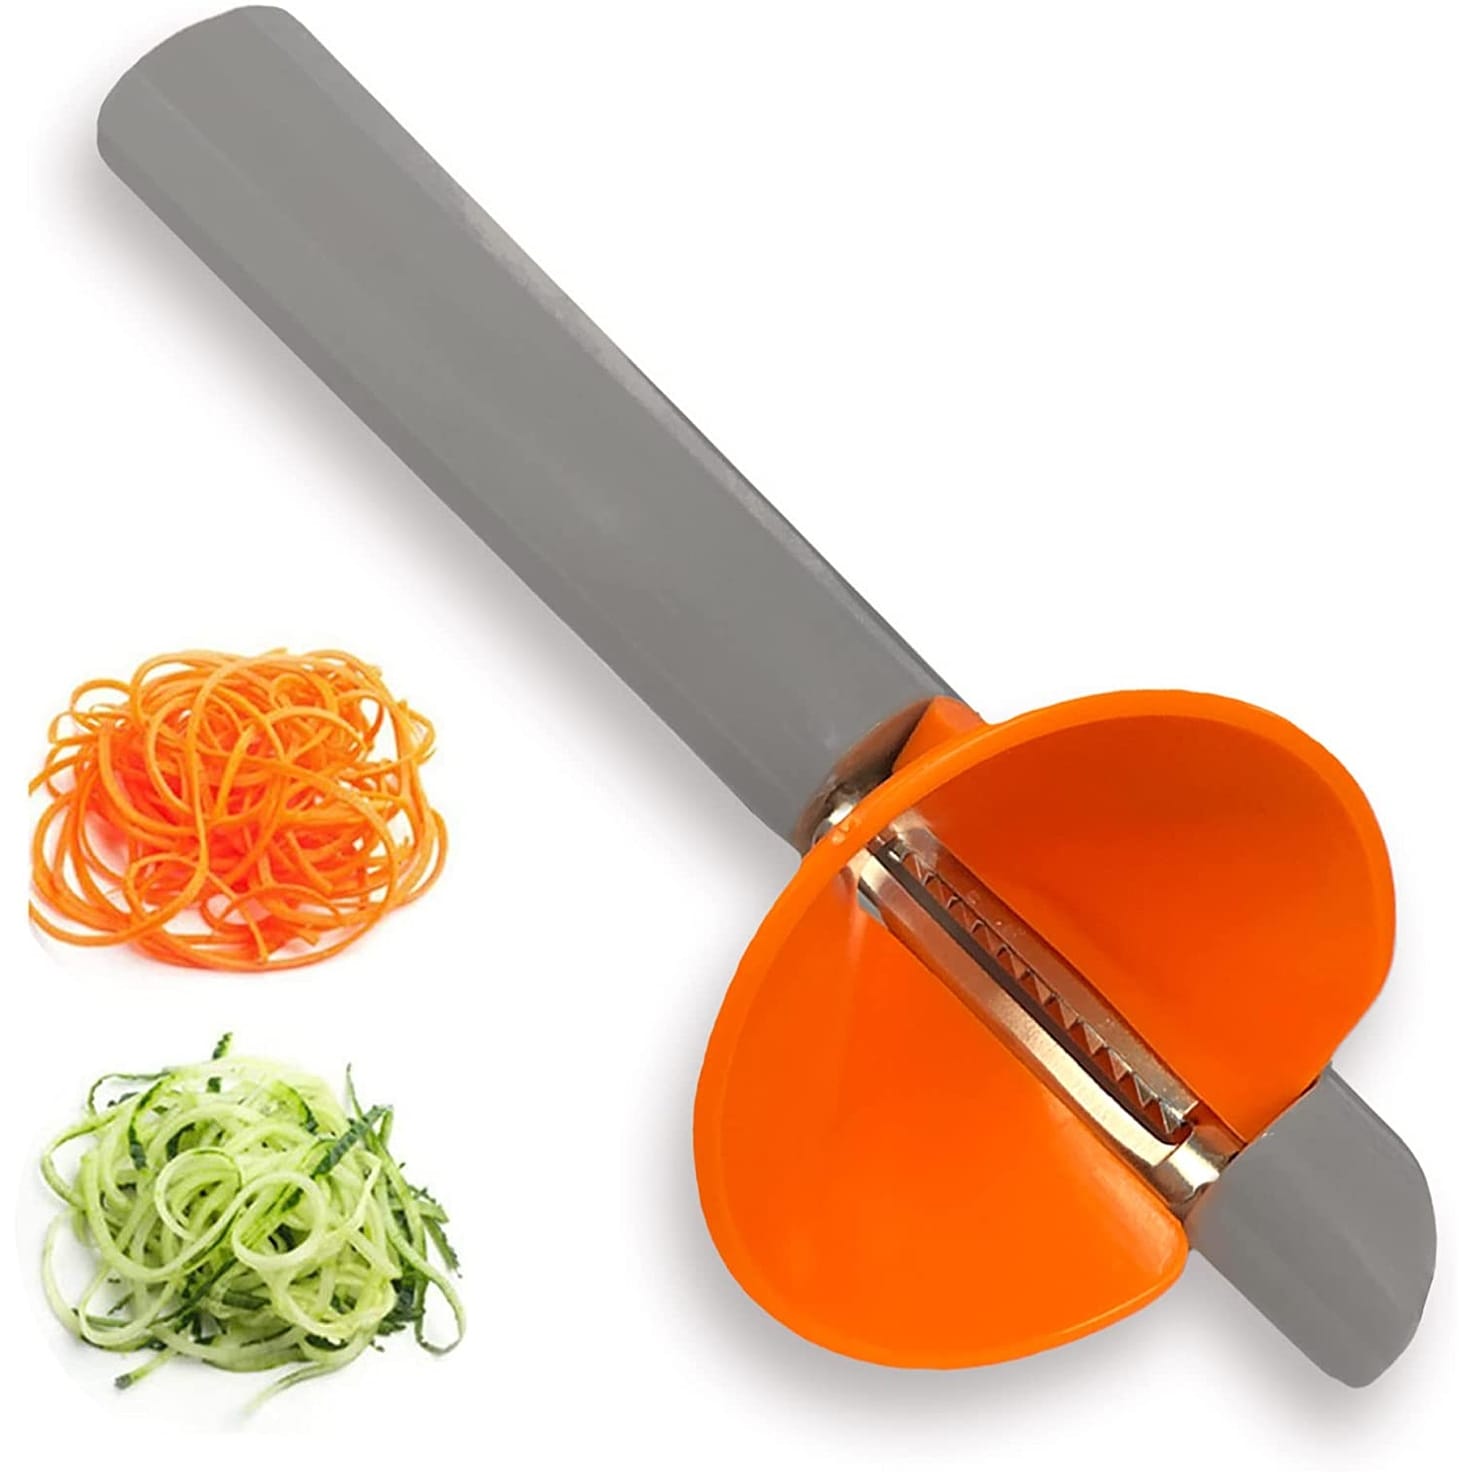 https://ak1.ostkcdn.com/images/products/is/images/direct/7146b8a441d7db2ccc91dc2504e14d415b263902/Cheer-Collection-Vegetable-Peeler-and-Spiralizer.jpg